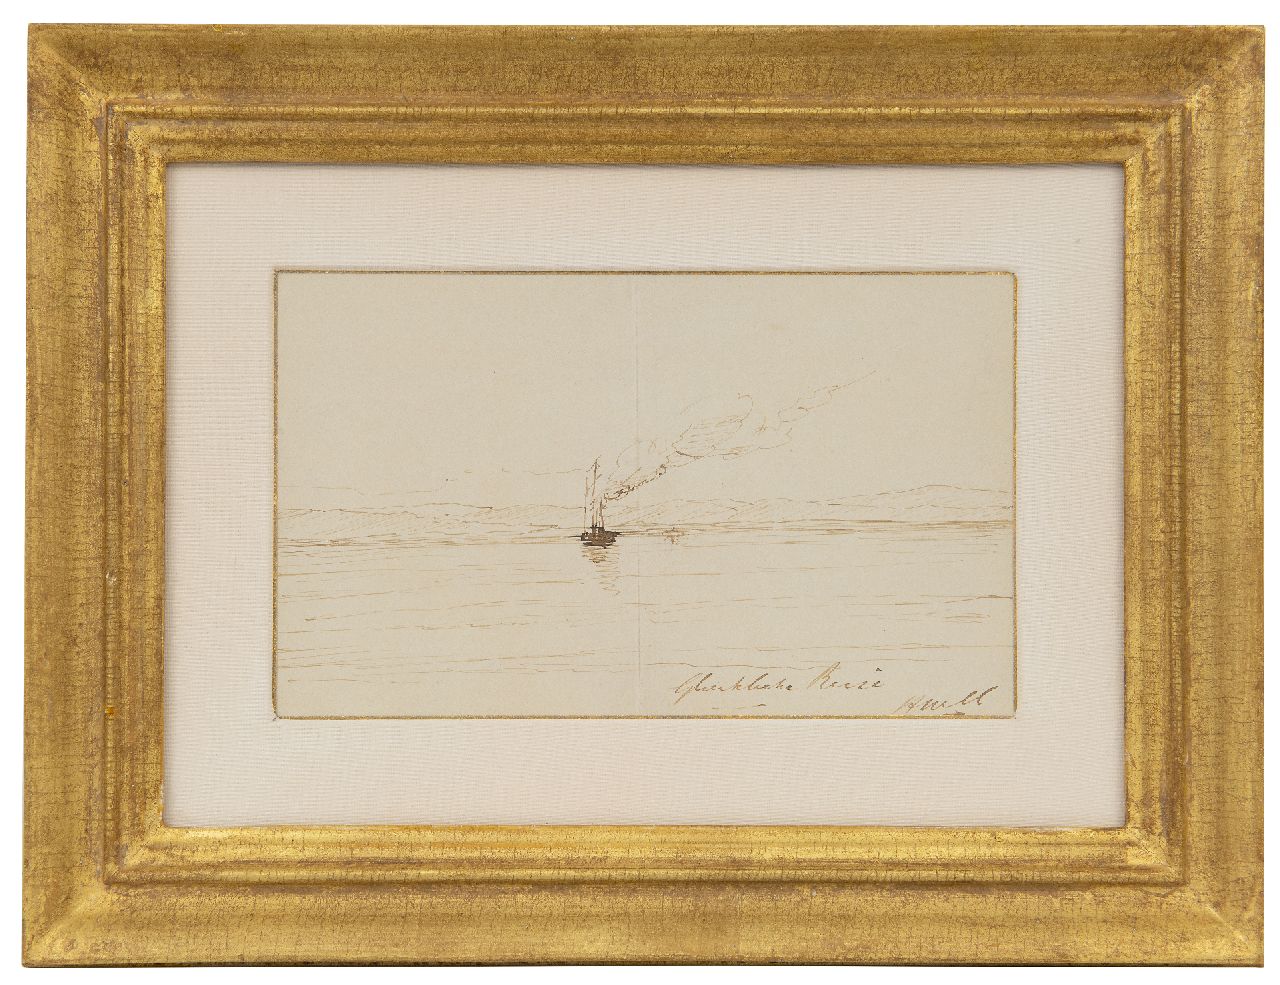 Mesdag H.W.  | Hendrik Willem Mesdag, Glückliche Reise, pen and Indian ink on paper 11.5 x 18.5 cm, signed l.r. with initials